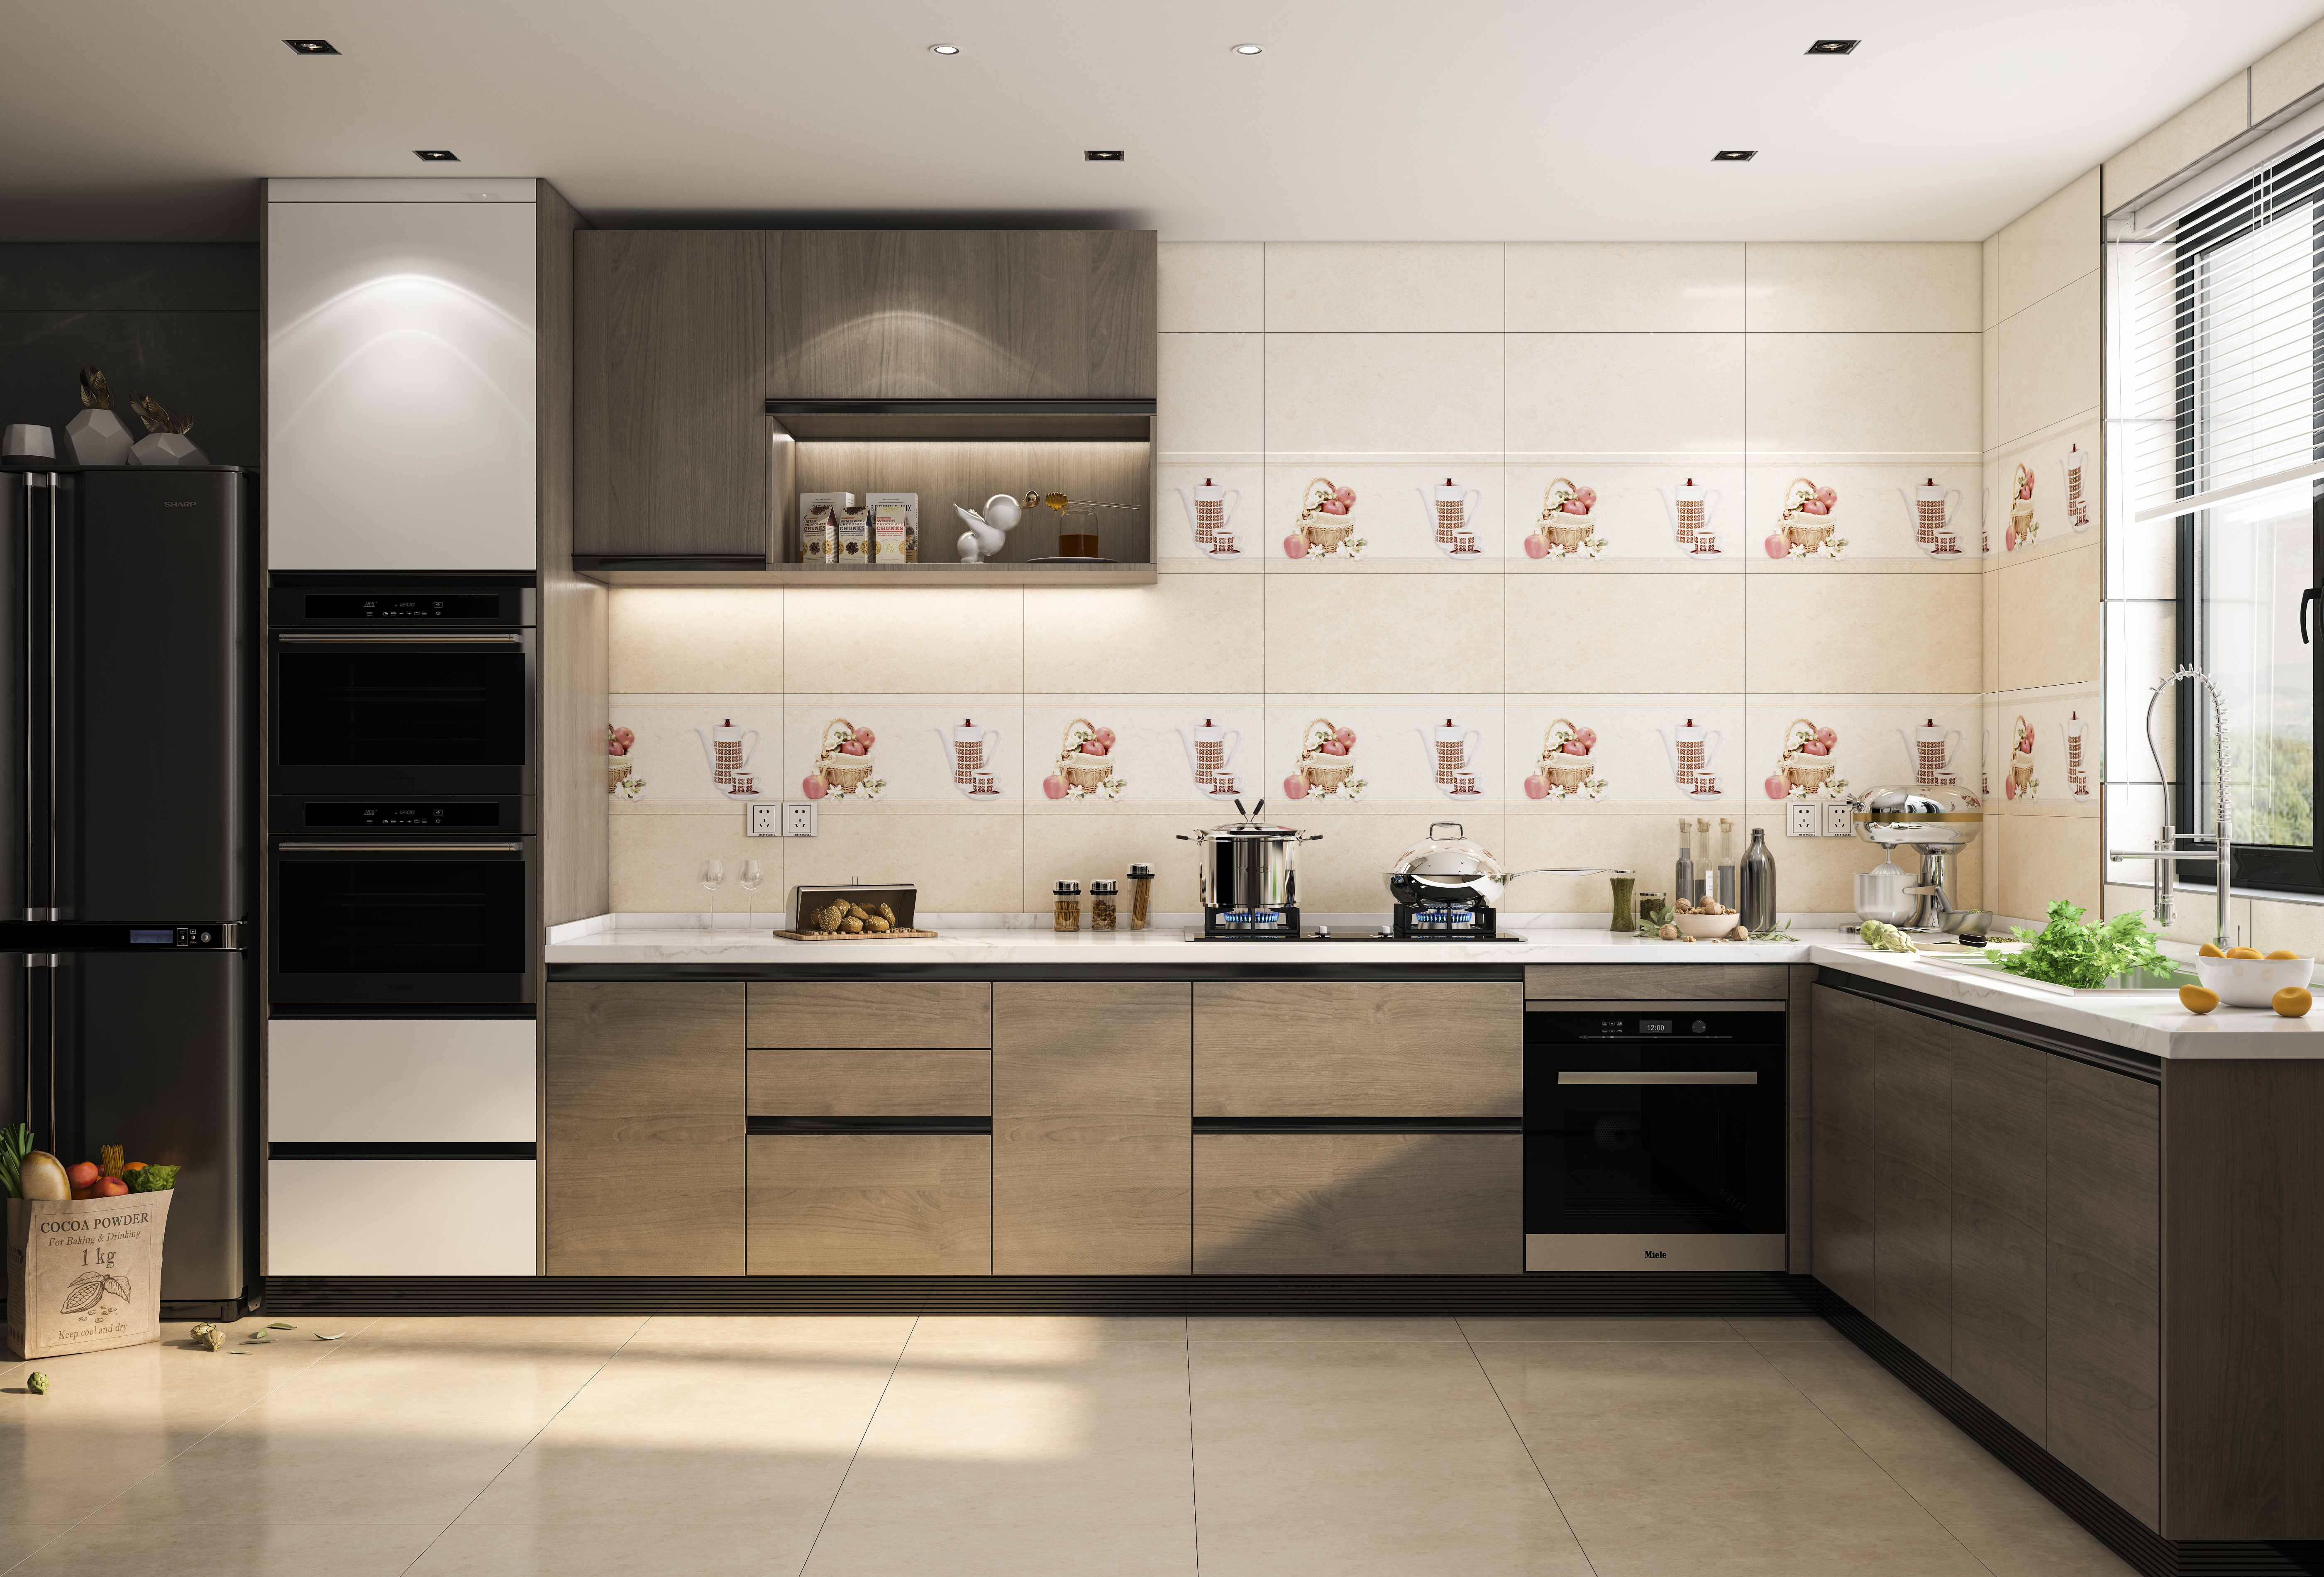 Top 10 Kitchen Tiles Design in Bangladesh at The Best Price